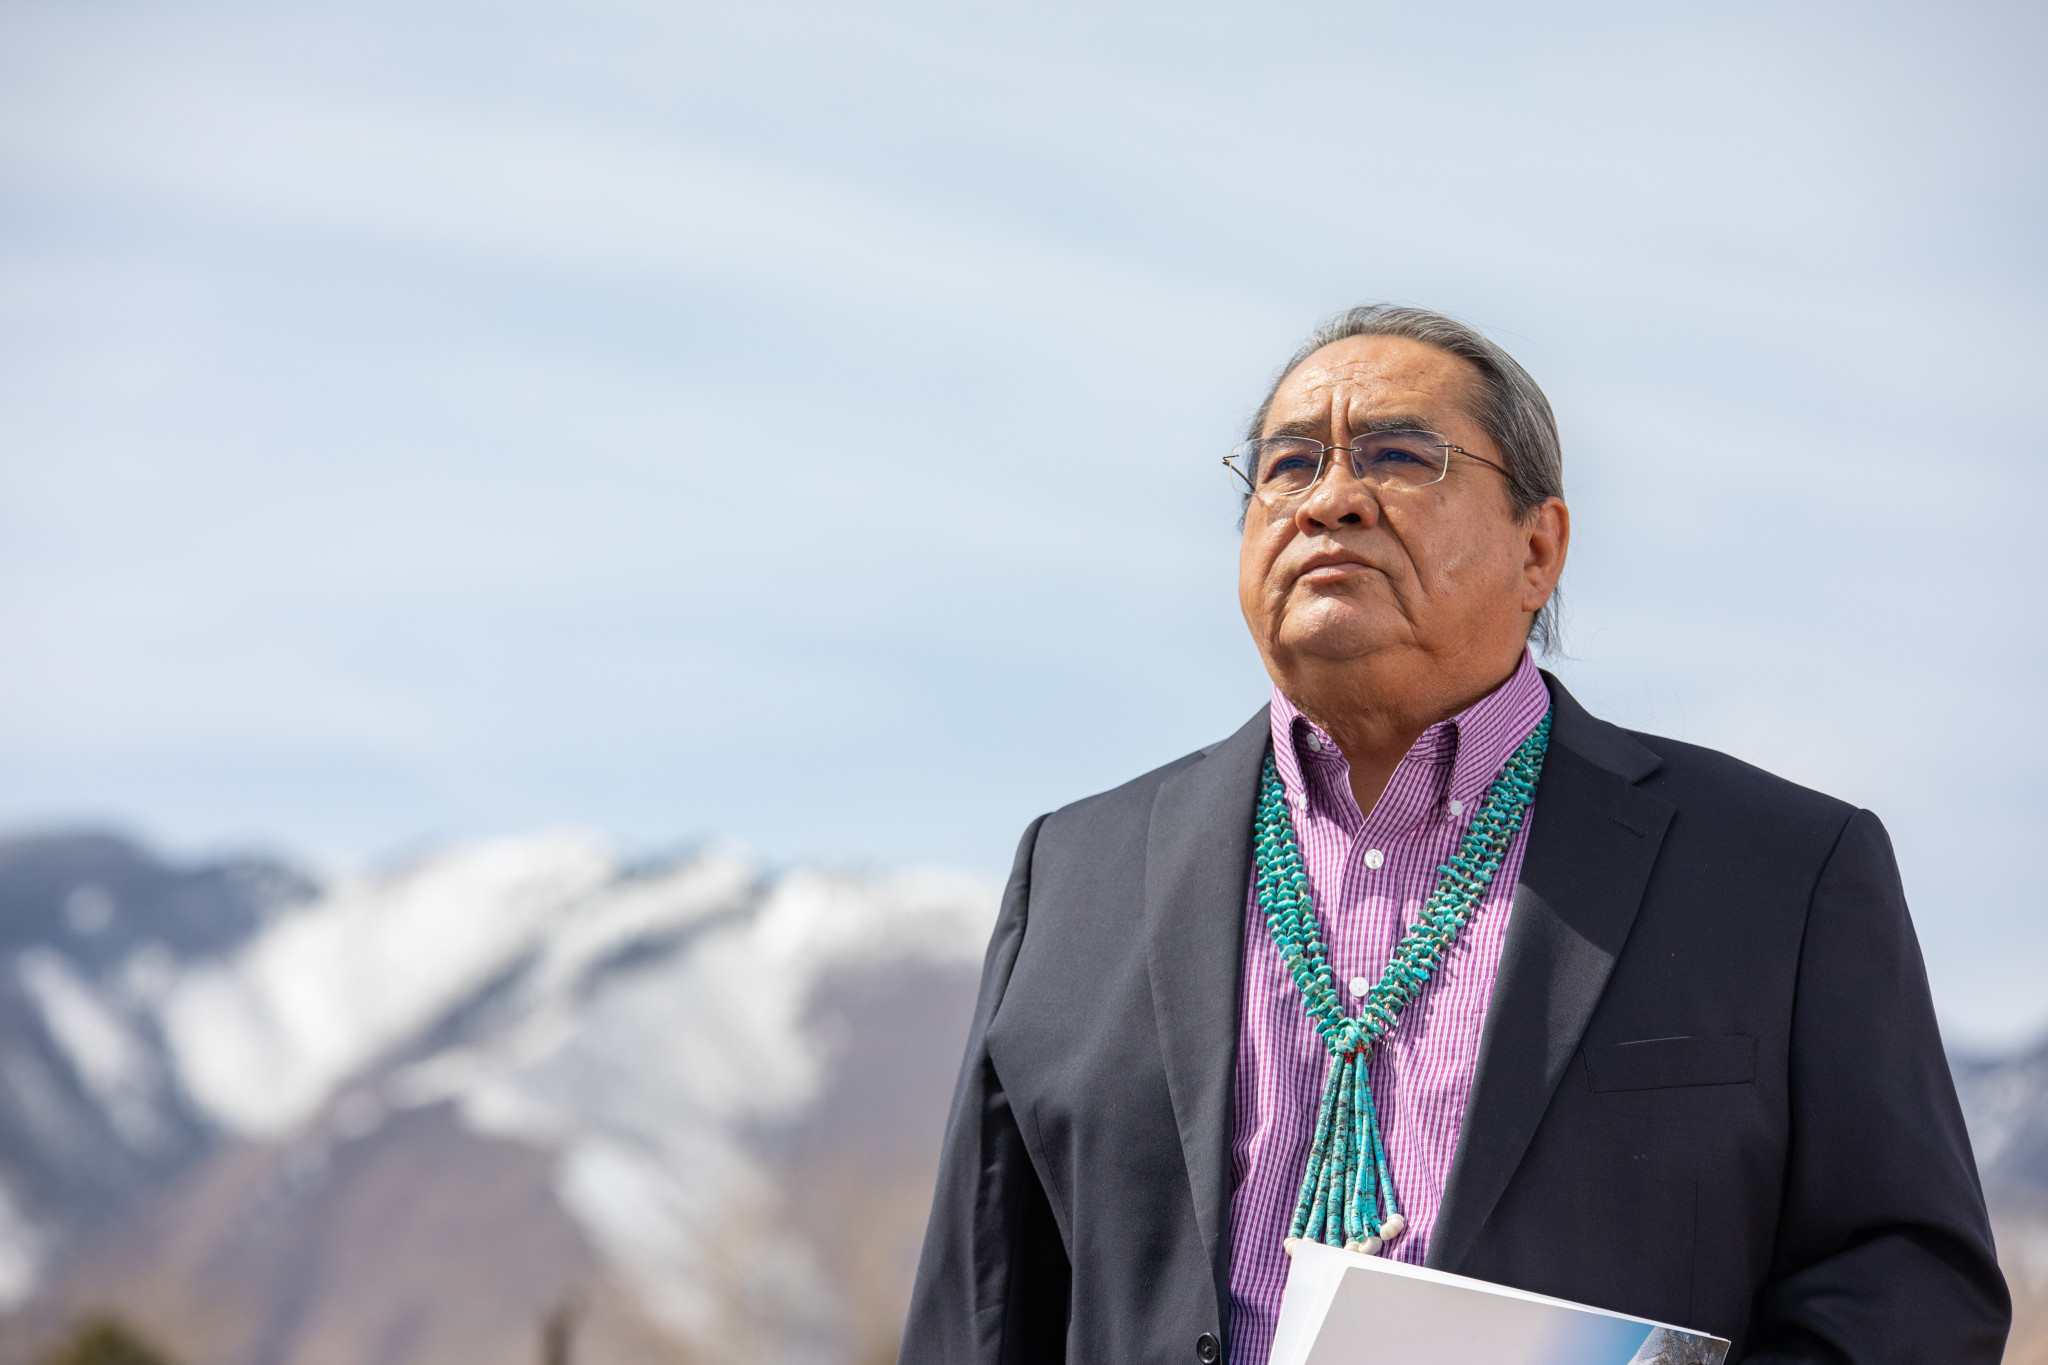 Manley Begay stands outside with a mountain in the background.